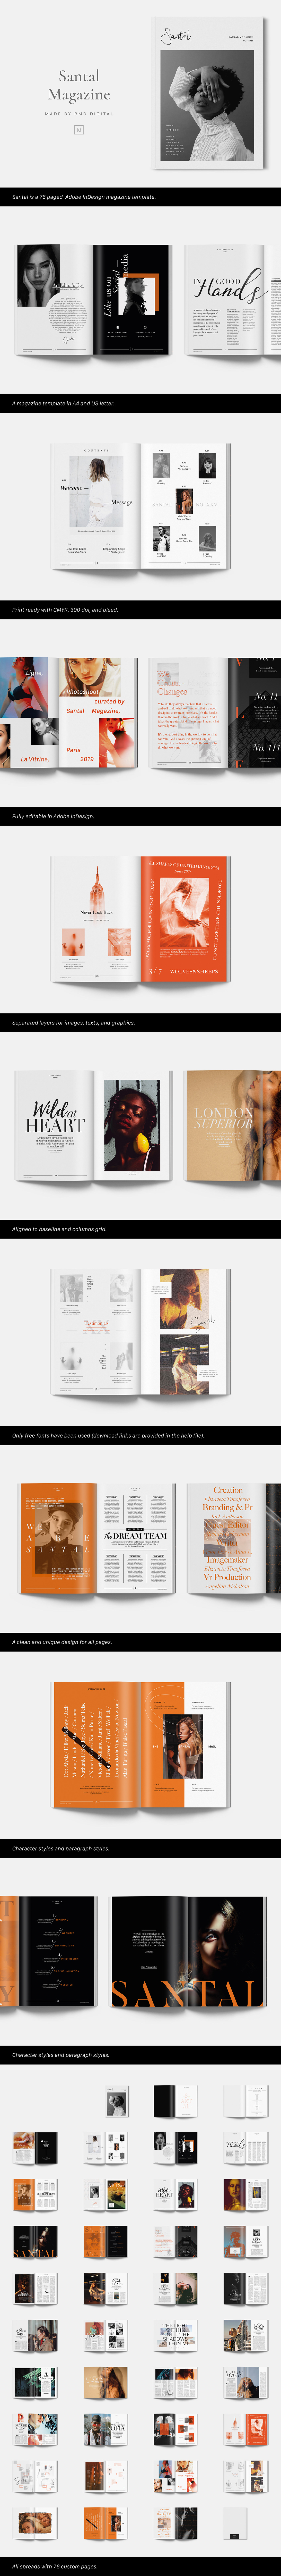 magazine template Layout Free Template SANTAL branding  brand identity editorial free InDesign